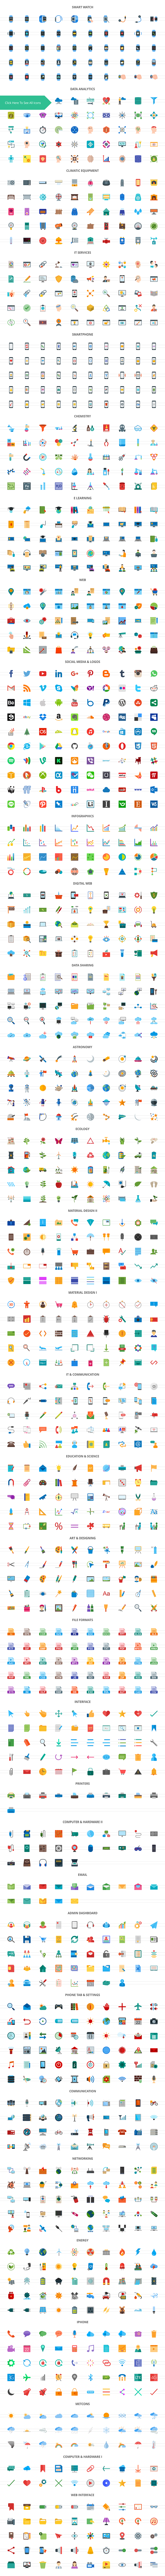 1440 Science & Technology Flat Icons in Graphics - product preview 1